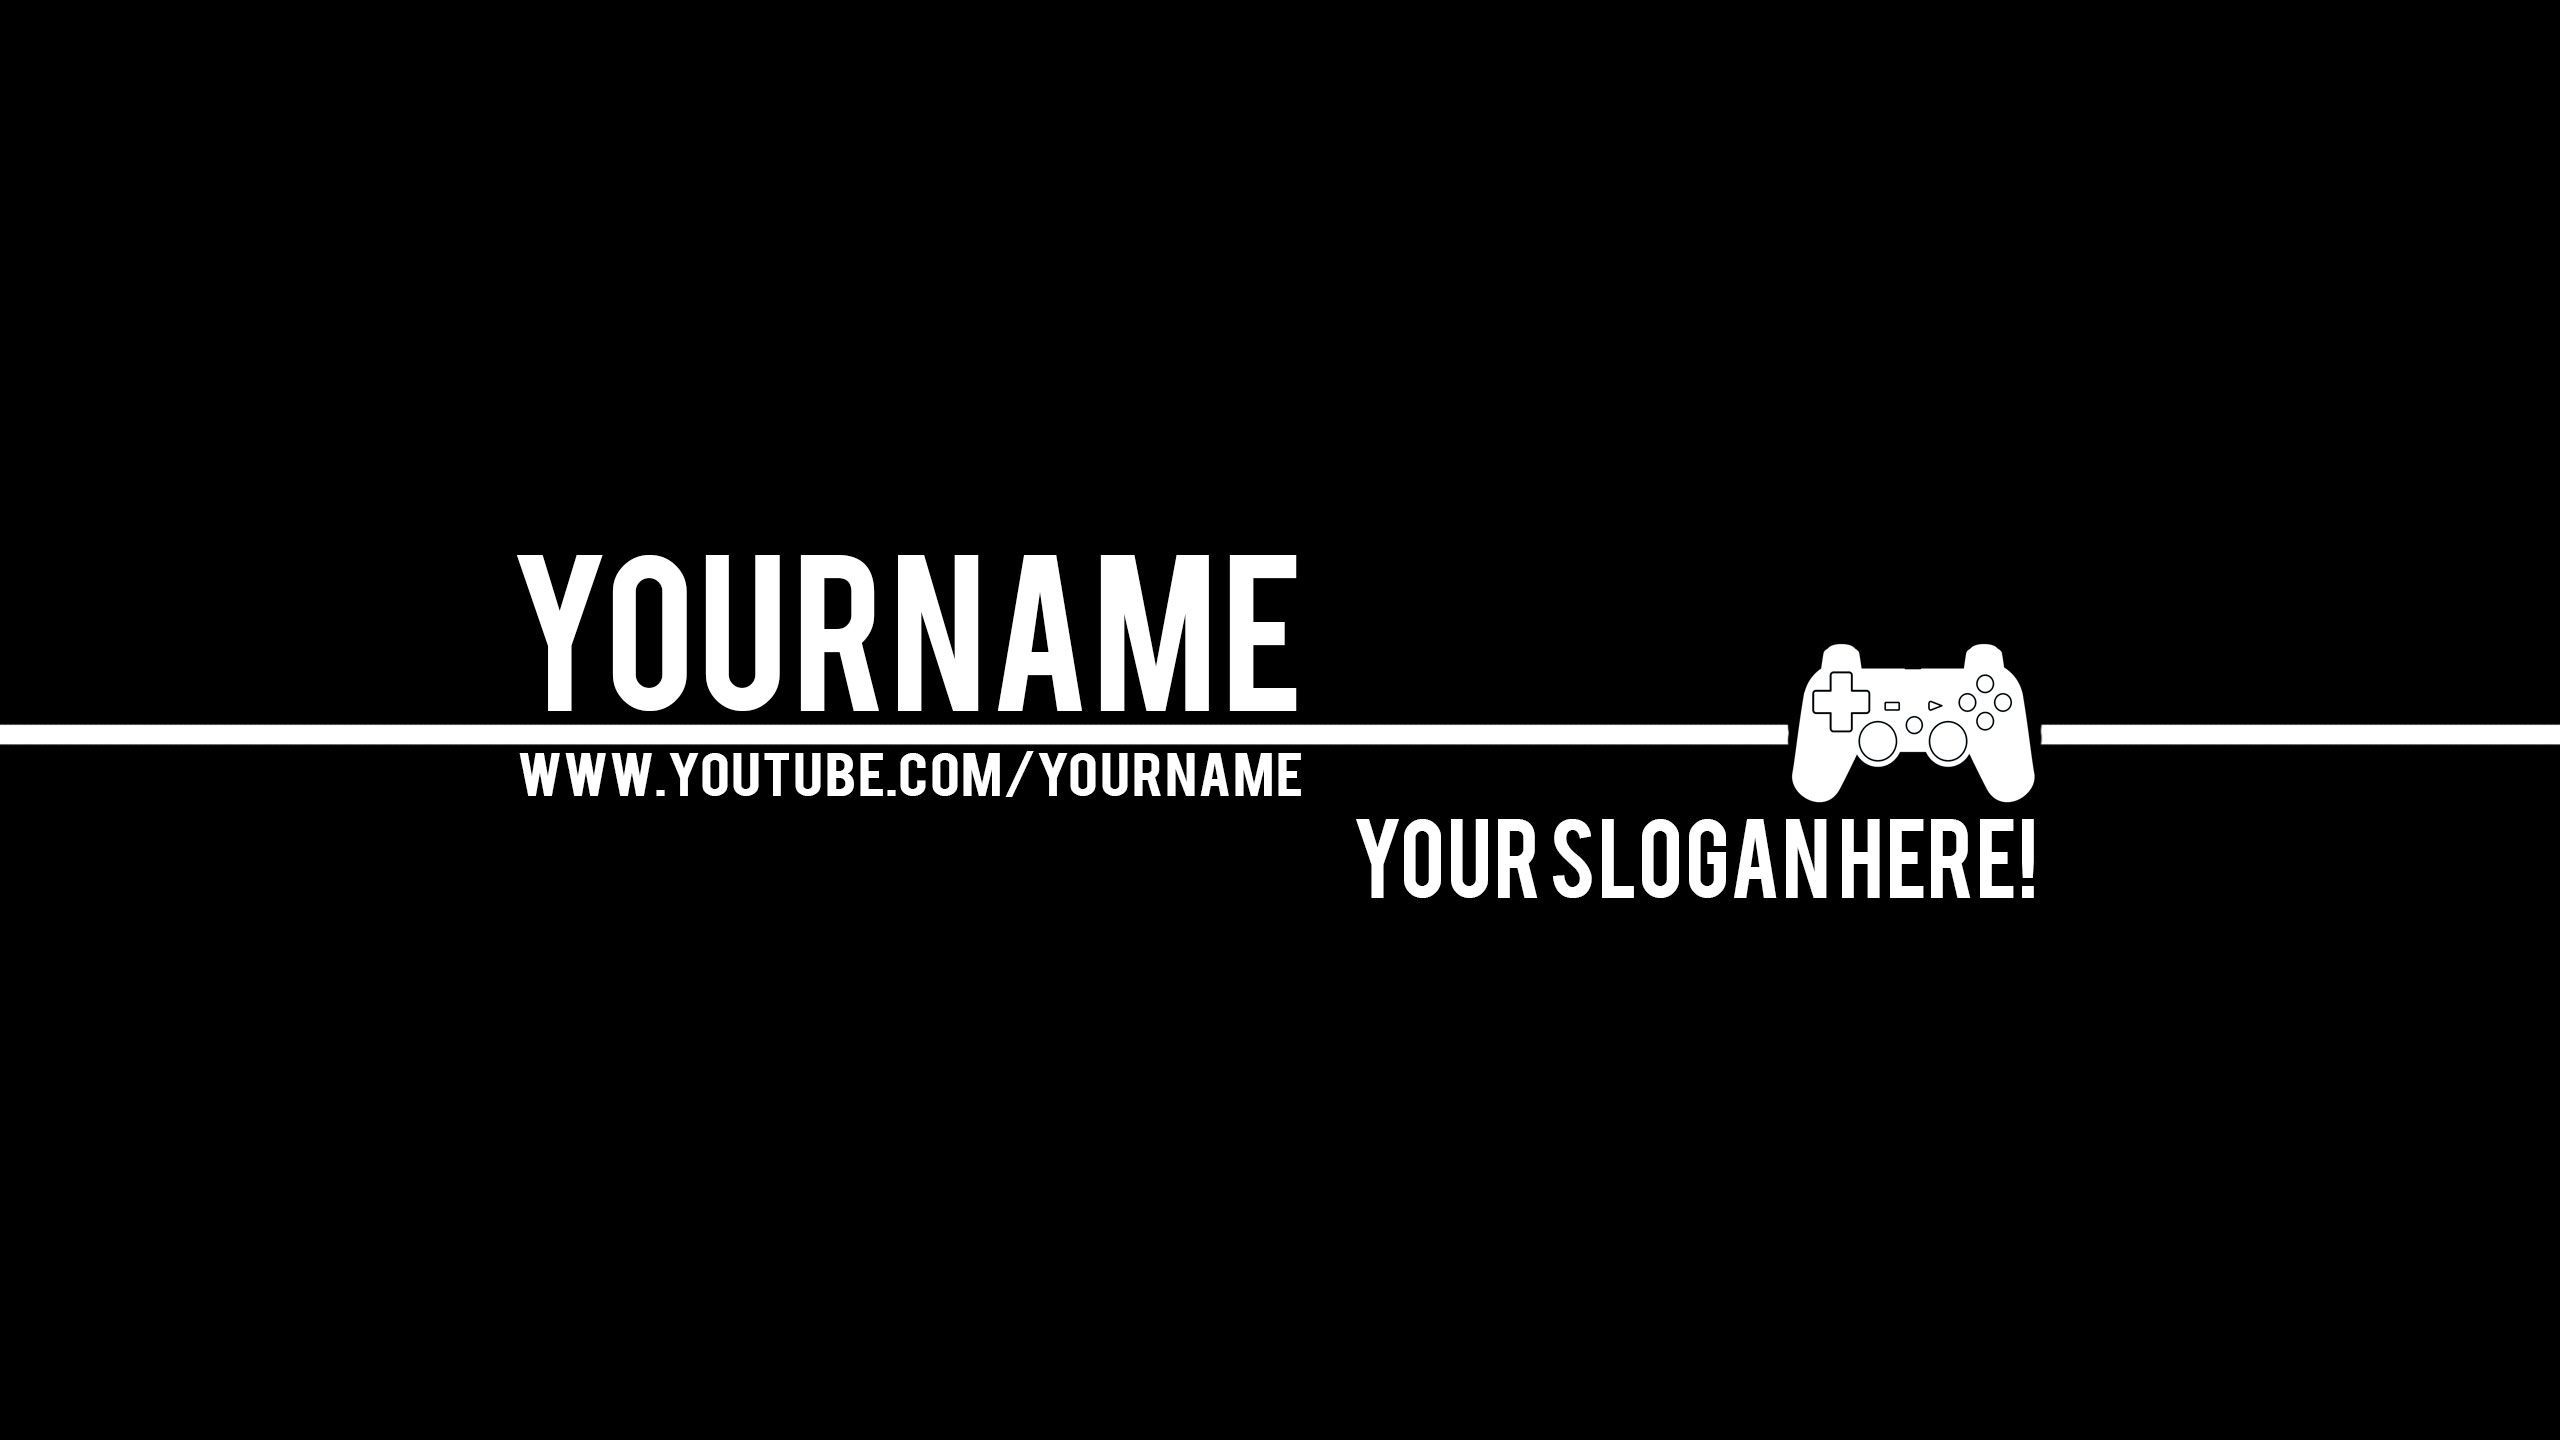 Youtube Gaming Wallpaper, Picture. Youtube banner background, Youtube banners, Youtube banner